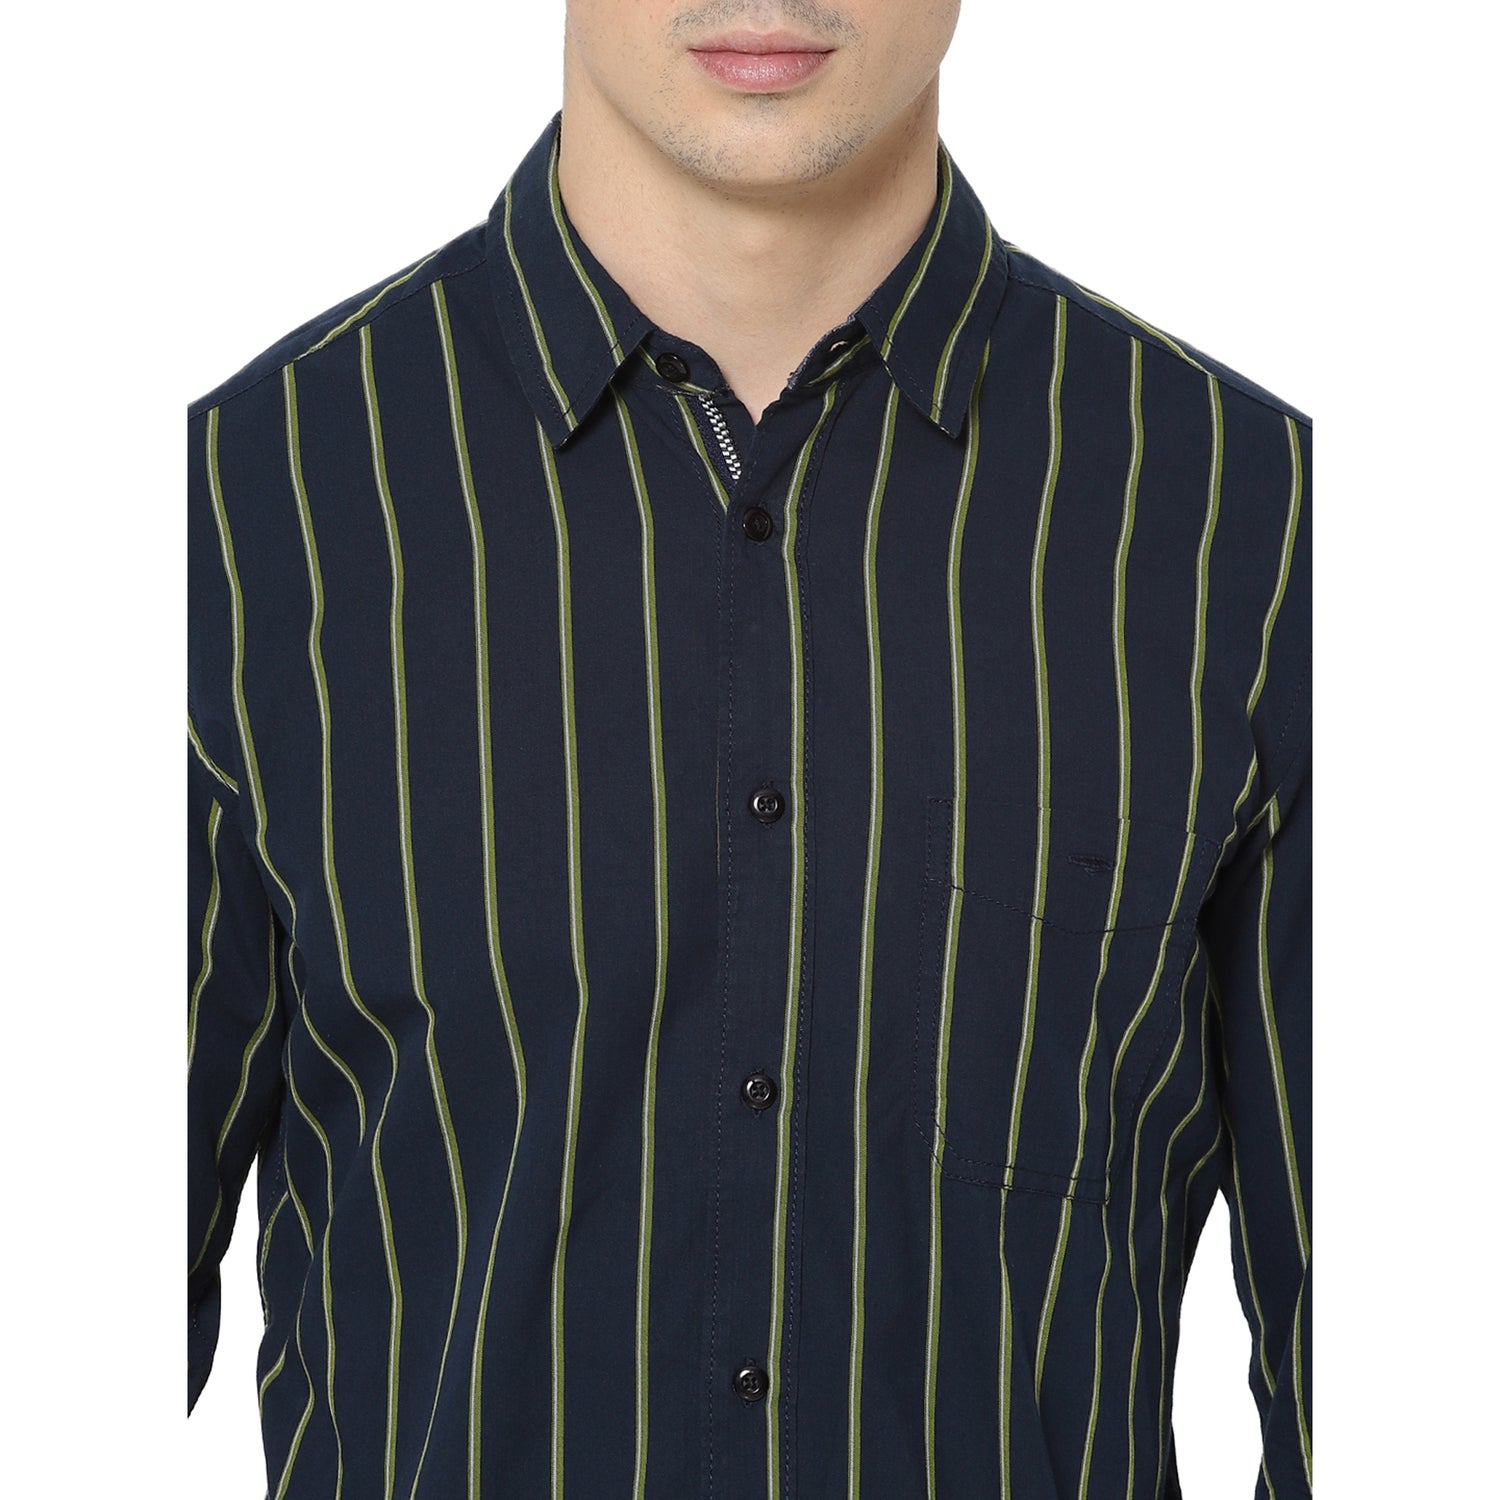 Green Slim Fit Striped Casual Shirt (TACOST)